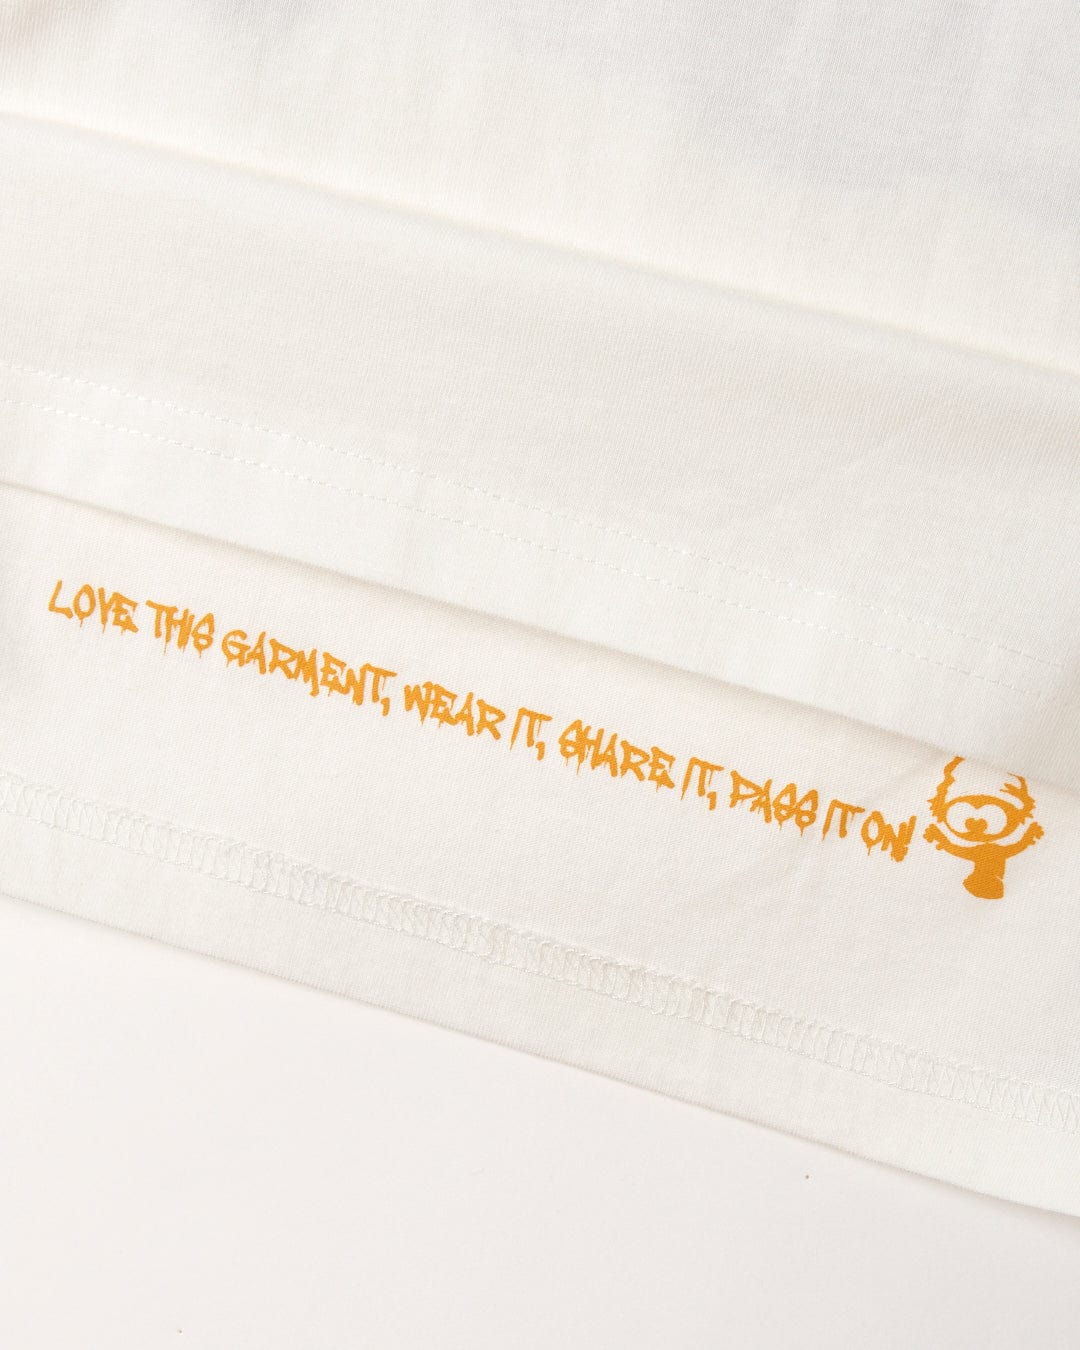 A white Saltrock 100% Cotton t-shirt with orange writing on it.